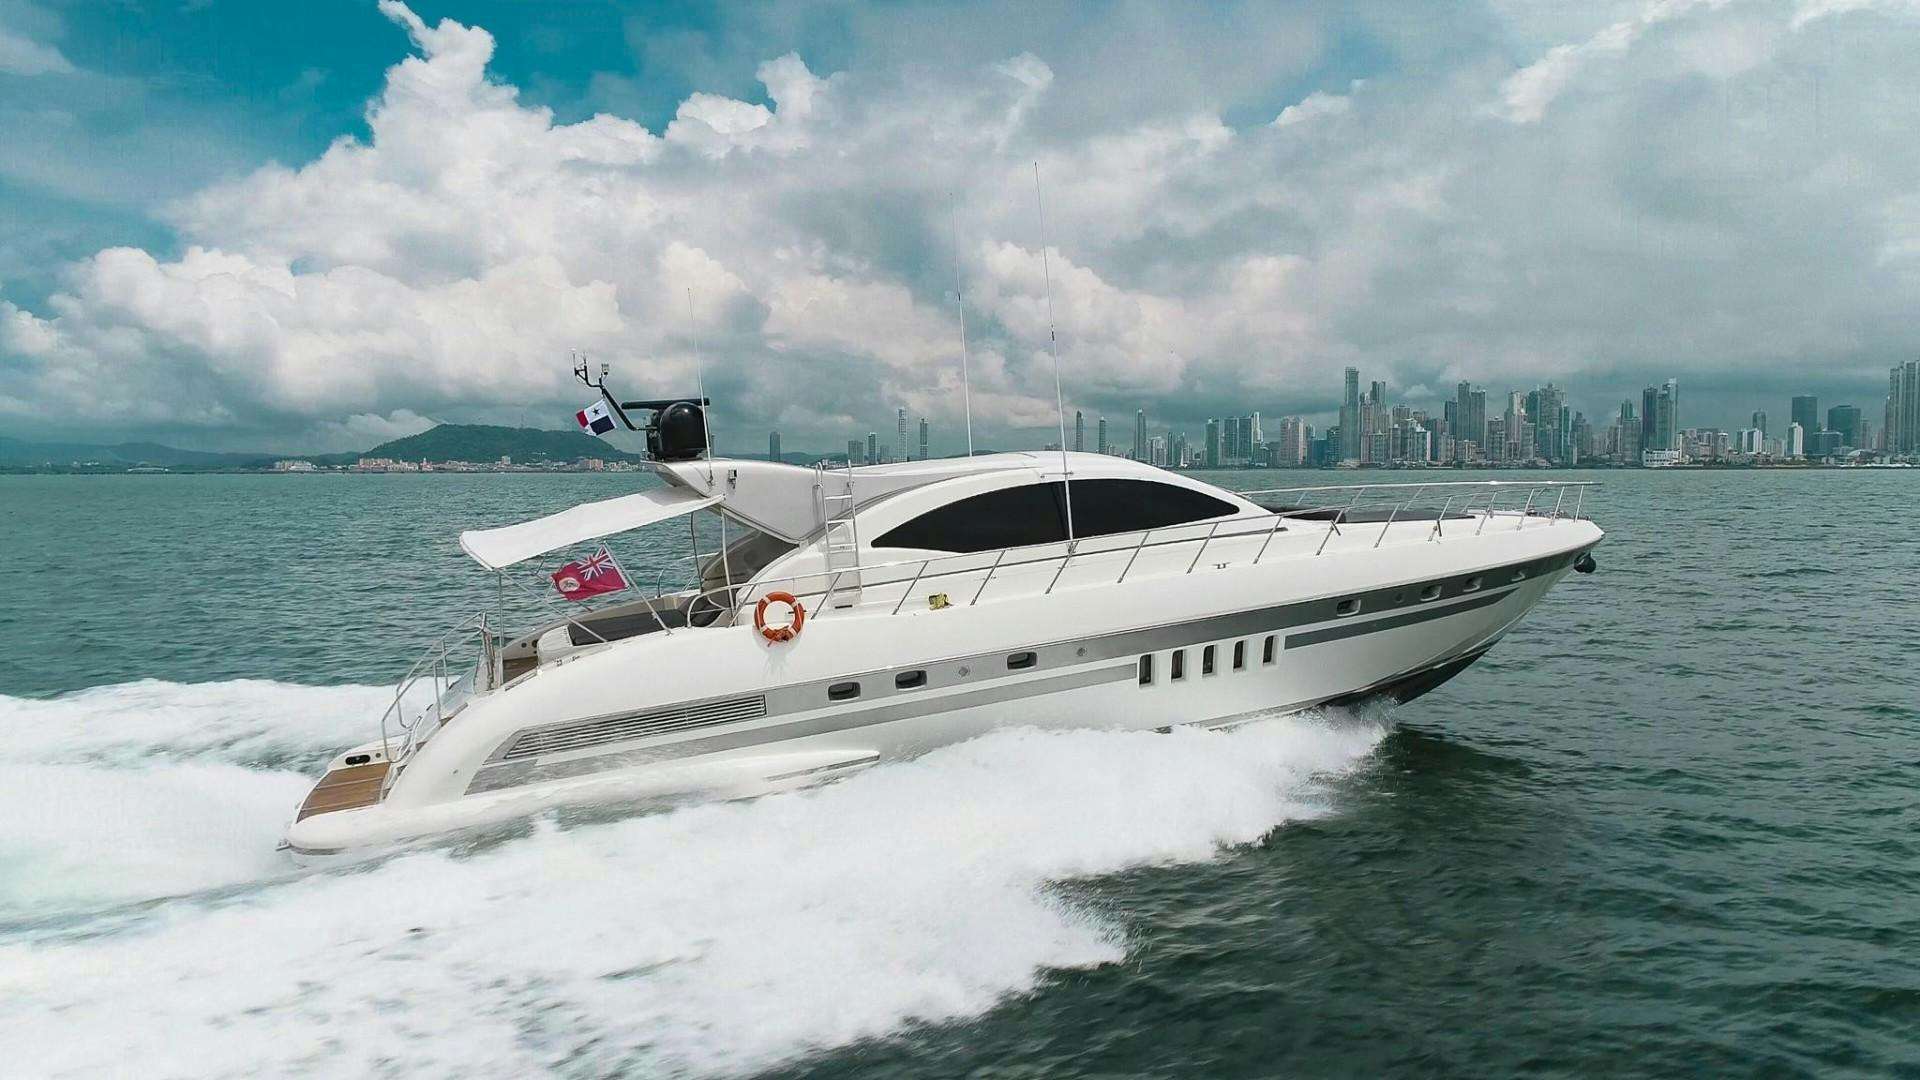 Querencia
Yacht for Sale